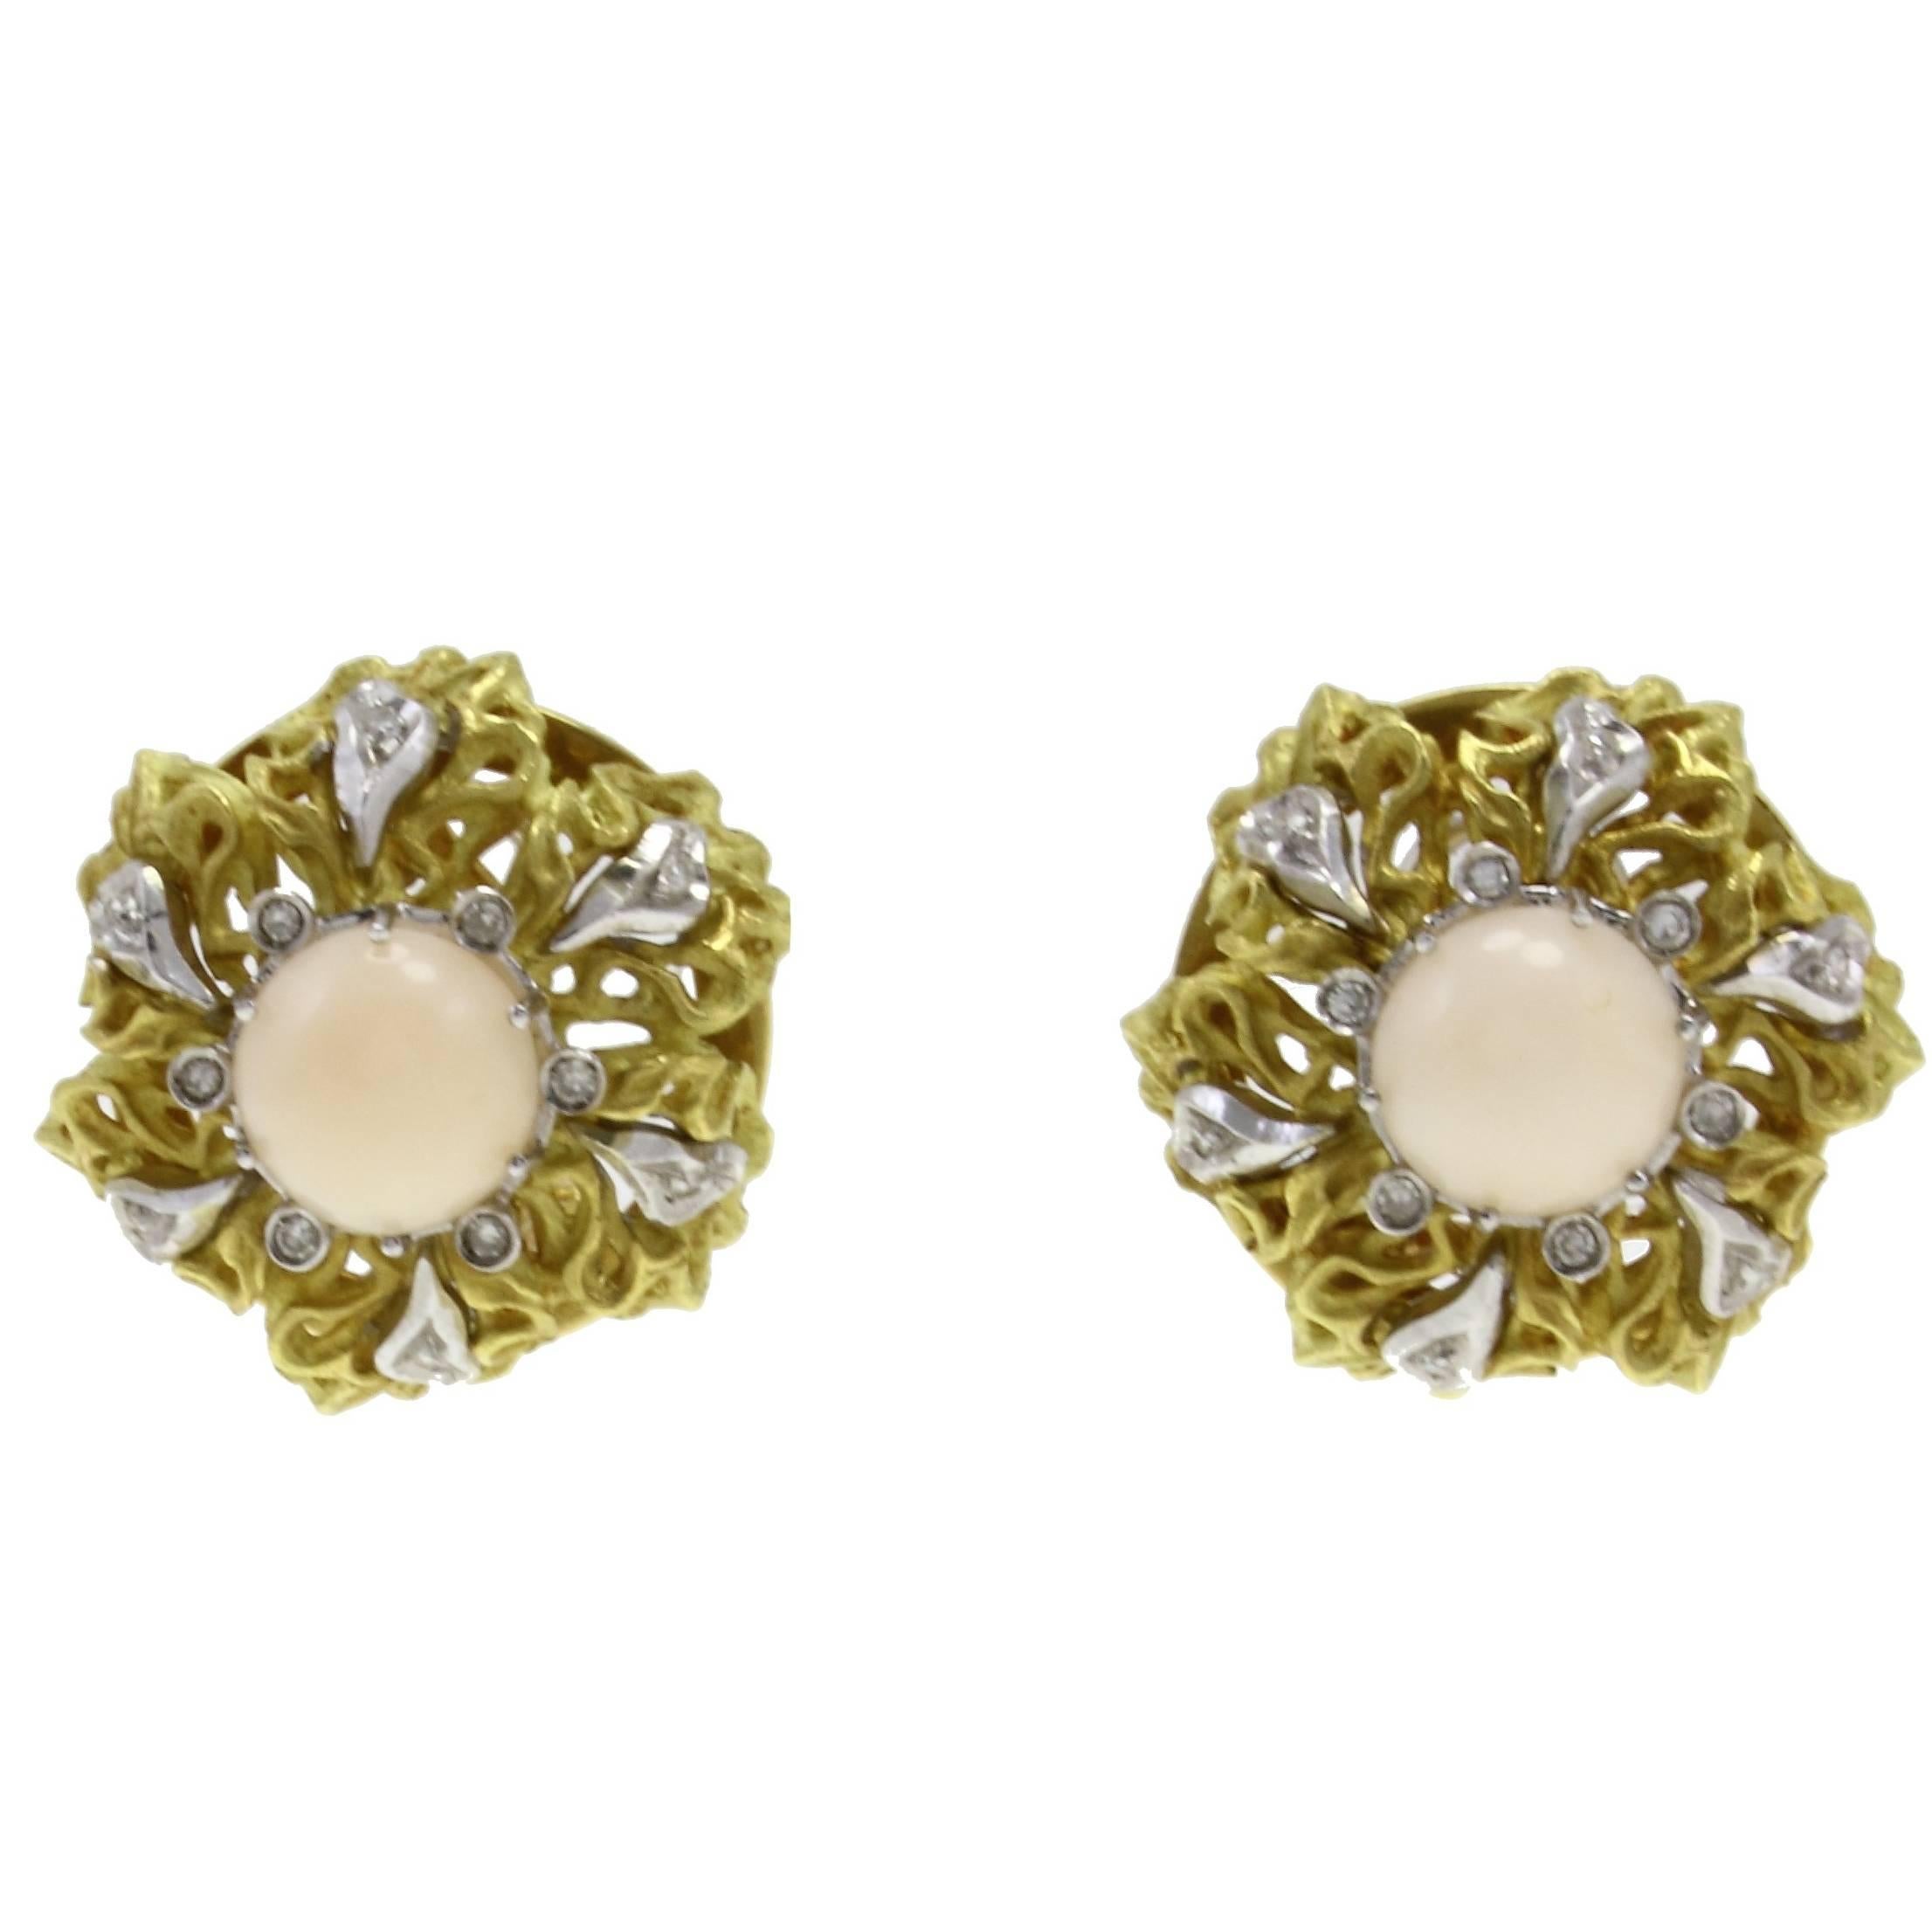 White Diamonds, Pink Coral Buttons, 18 Kt Yellow and White Gold Clip-on Earrings